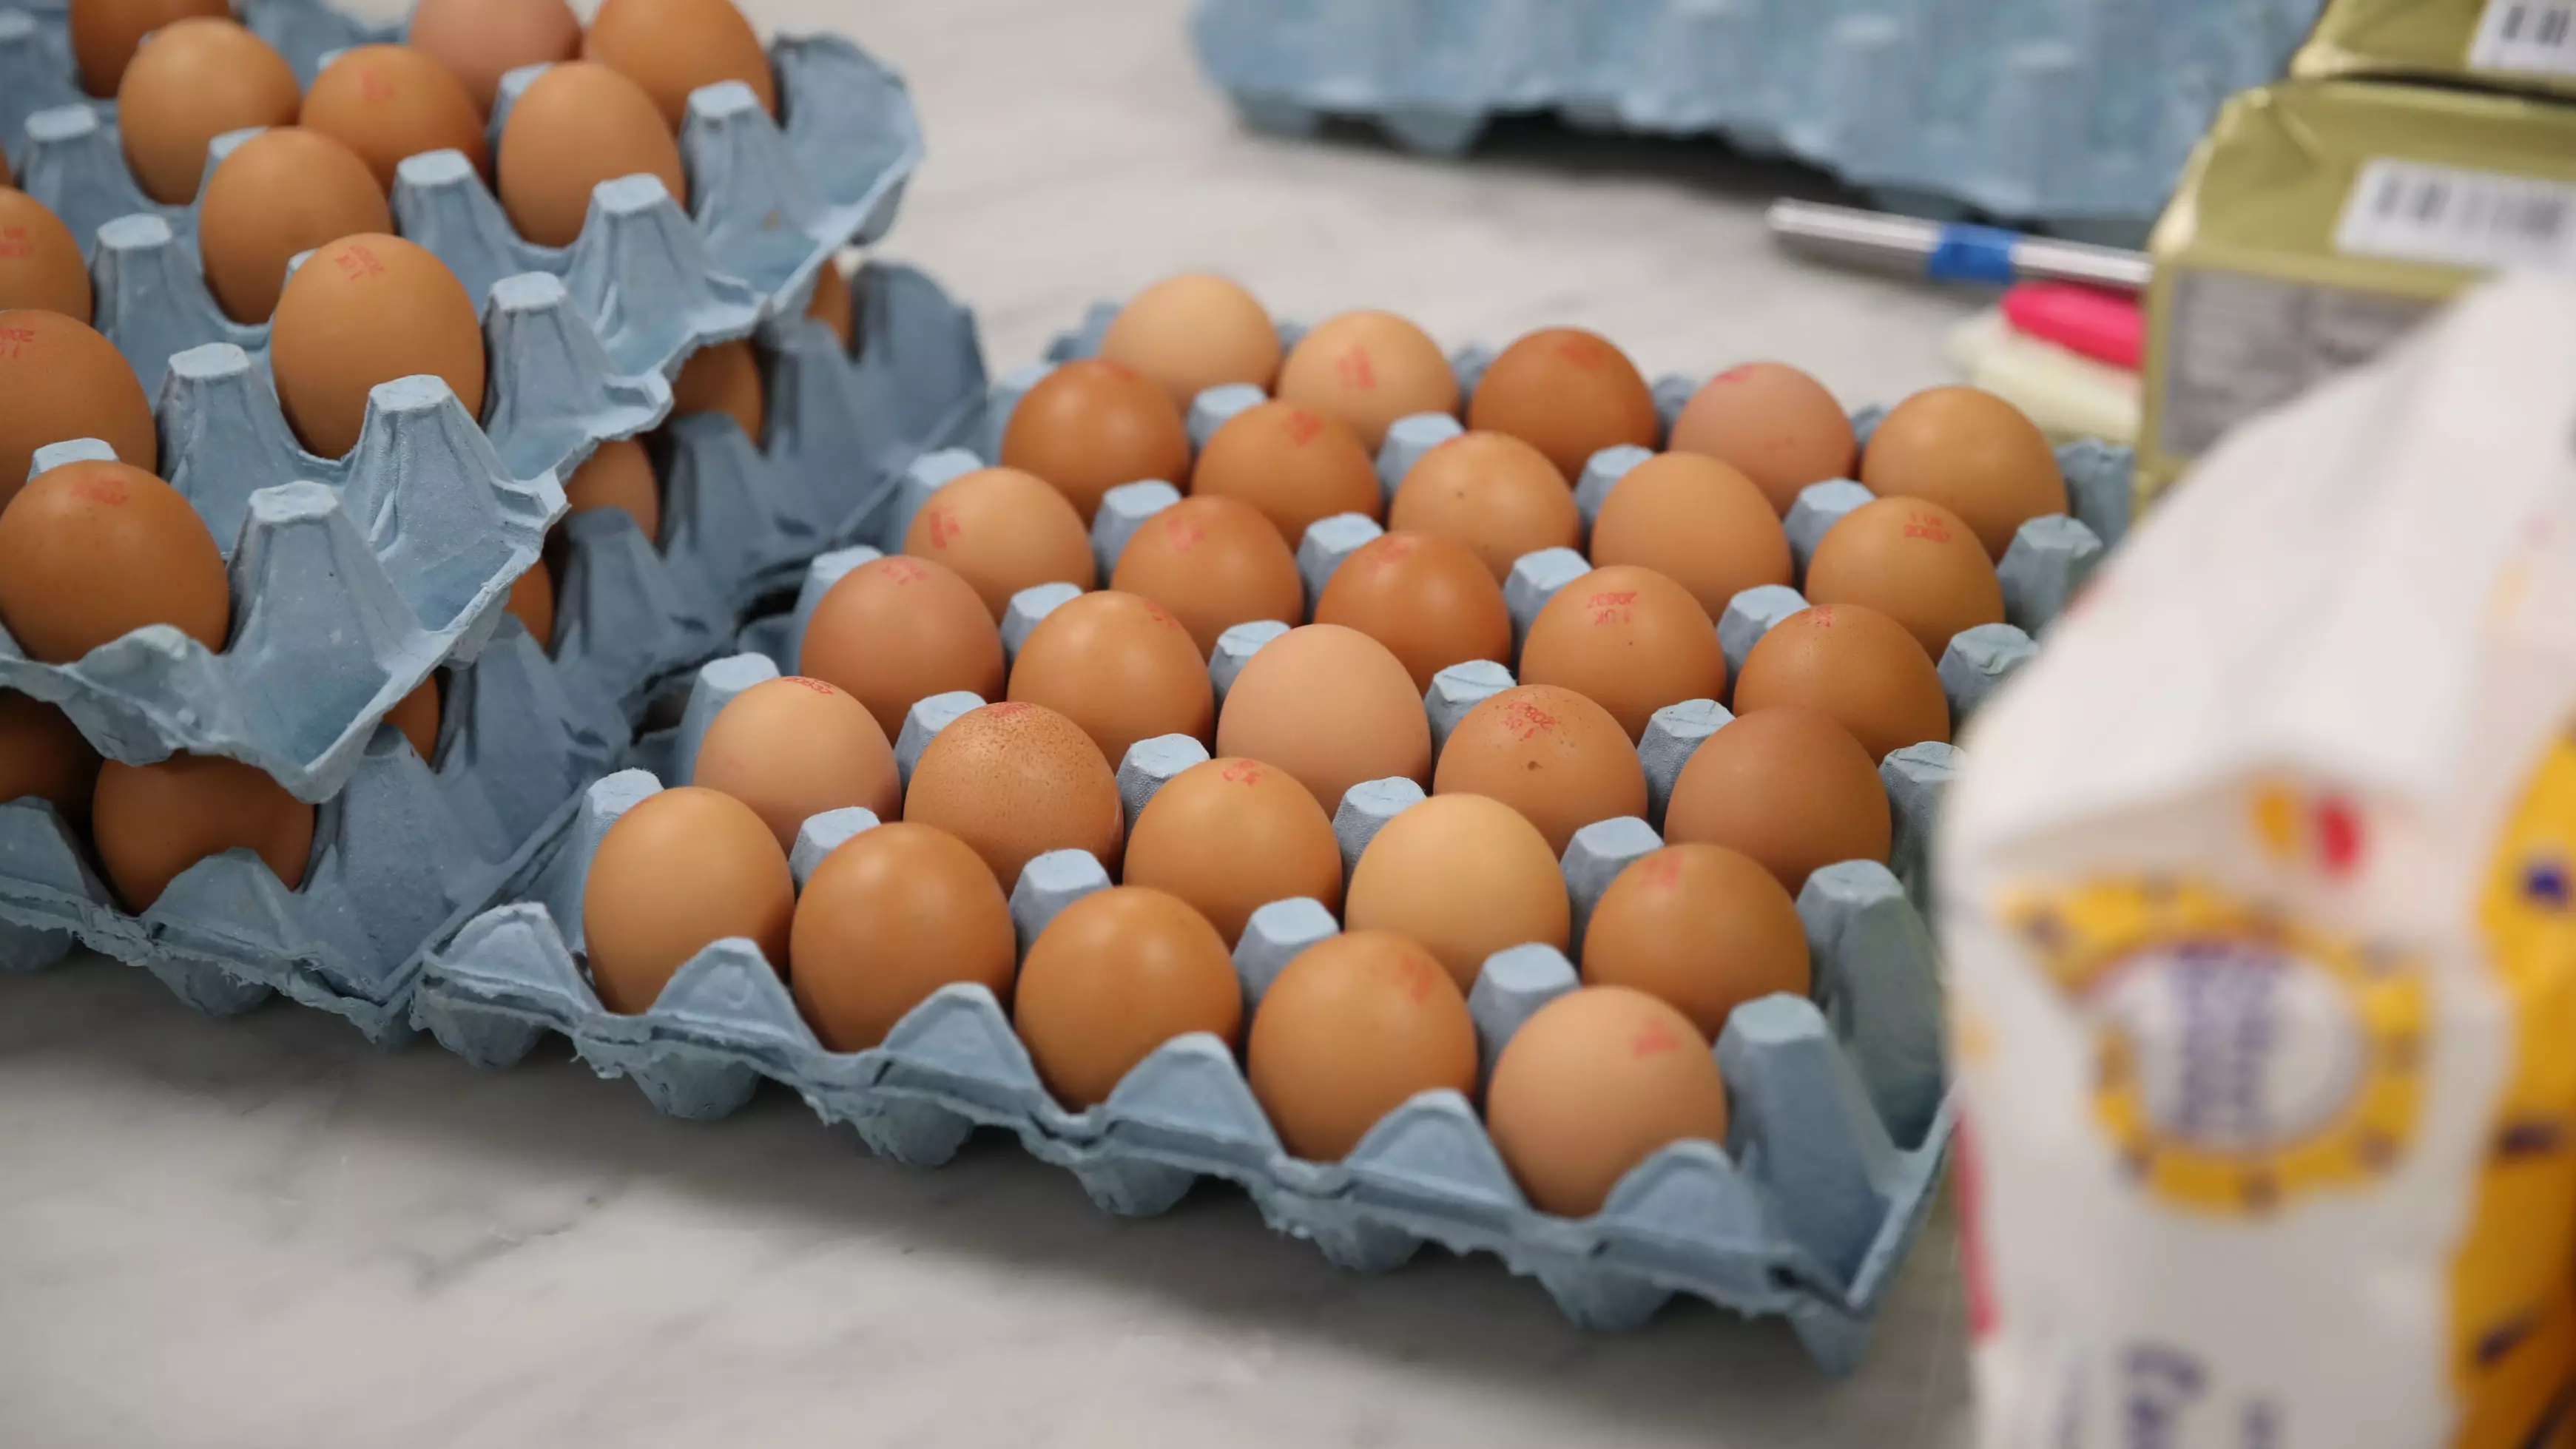 Man Dies After Trying To Eat 50 Eggs In Bizarre Challenge 